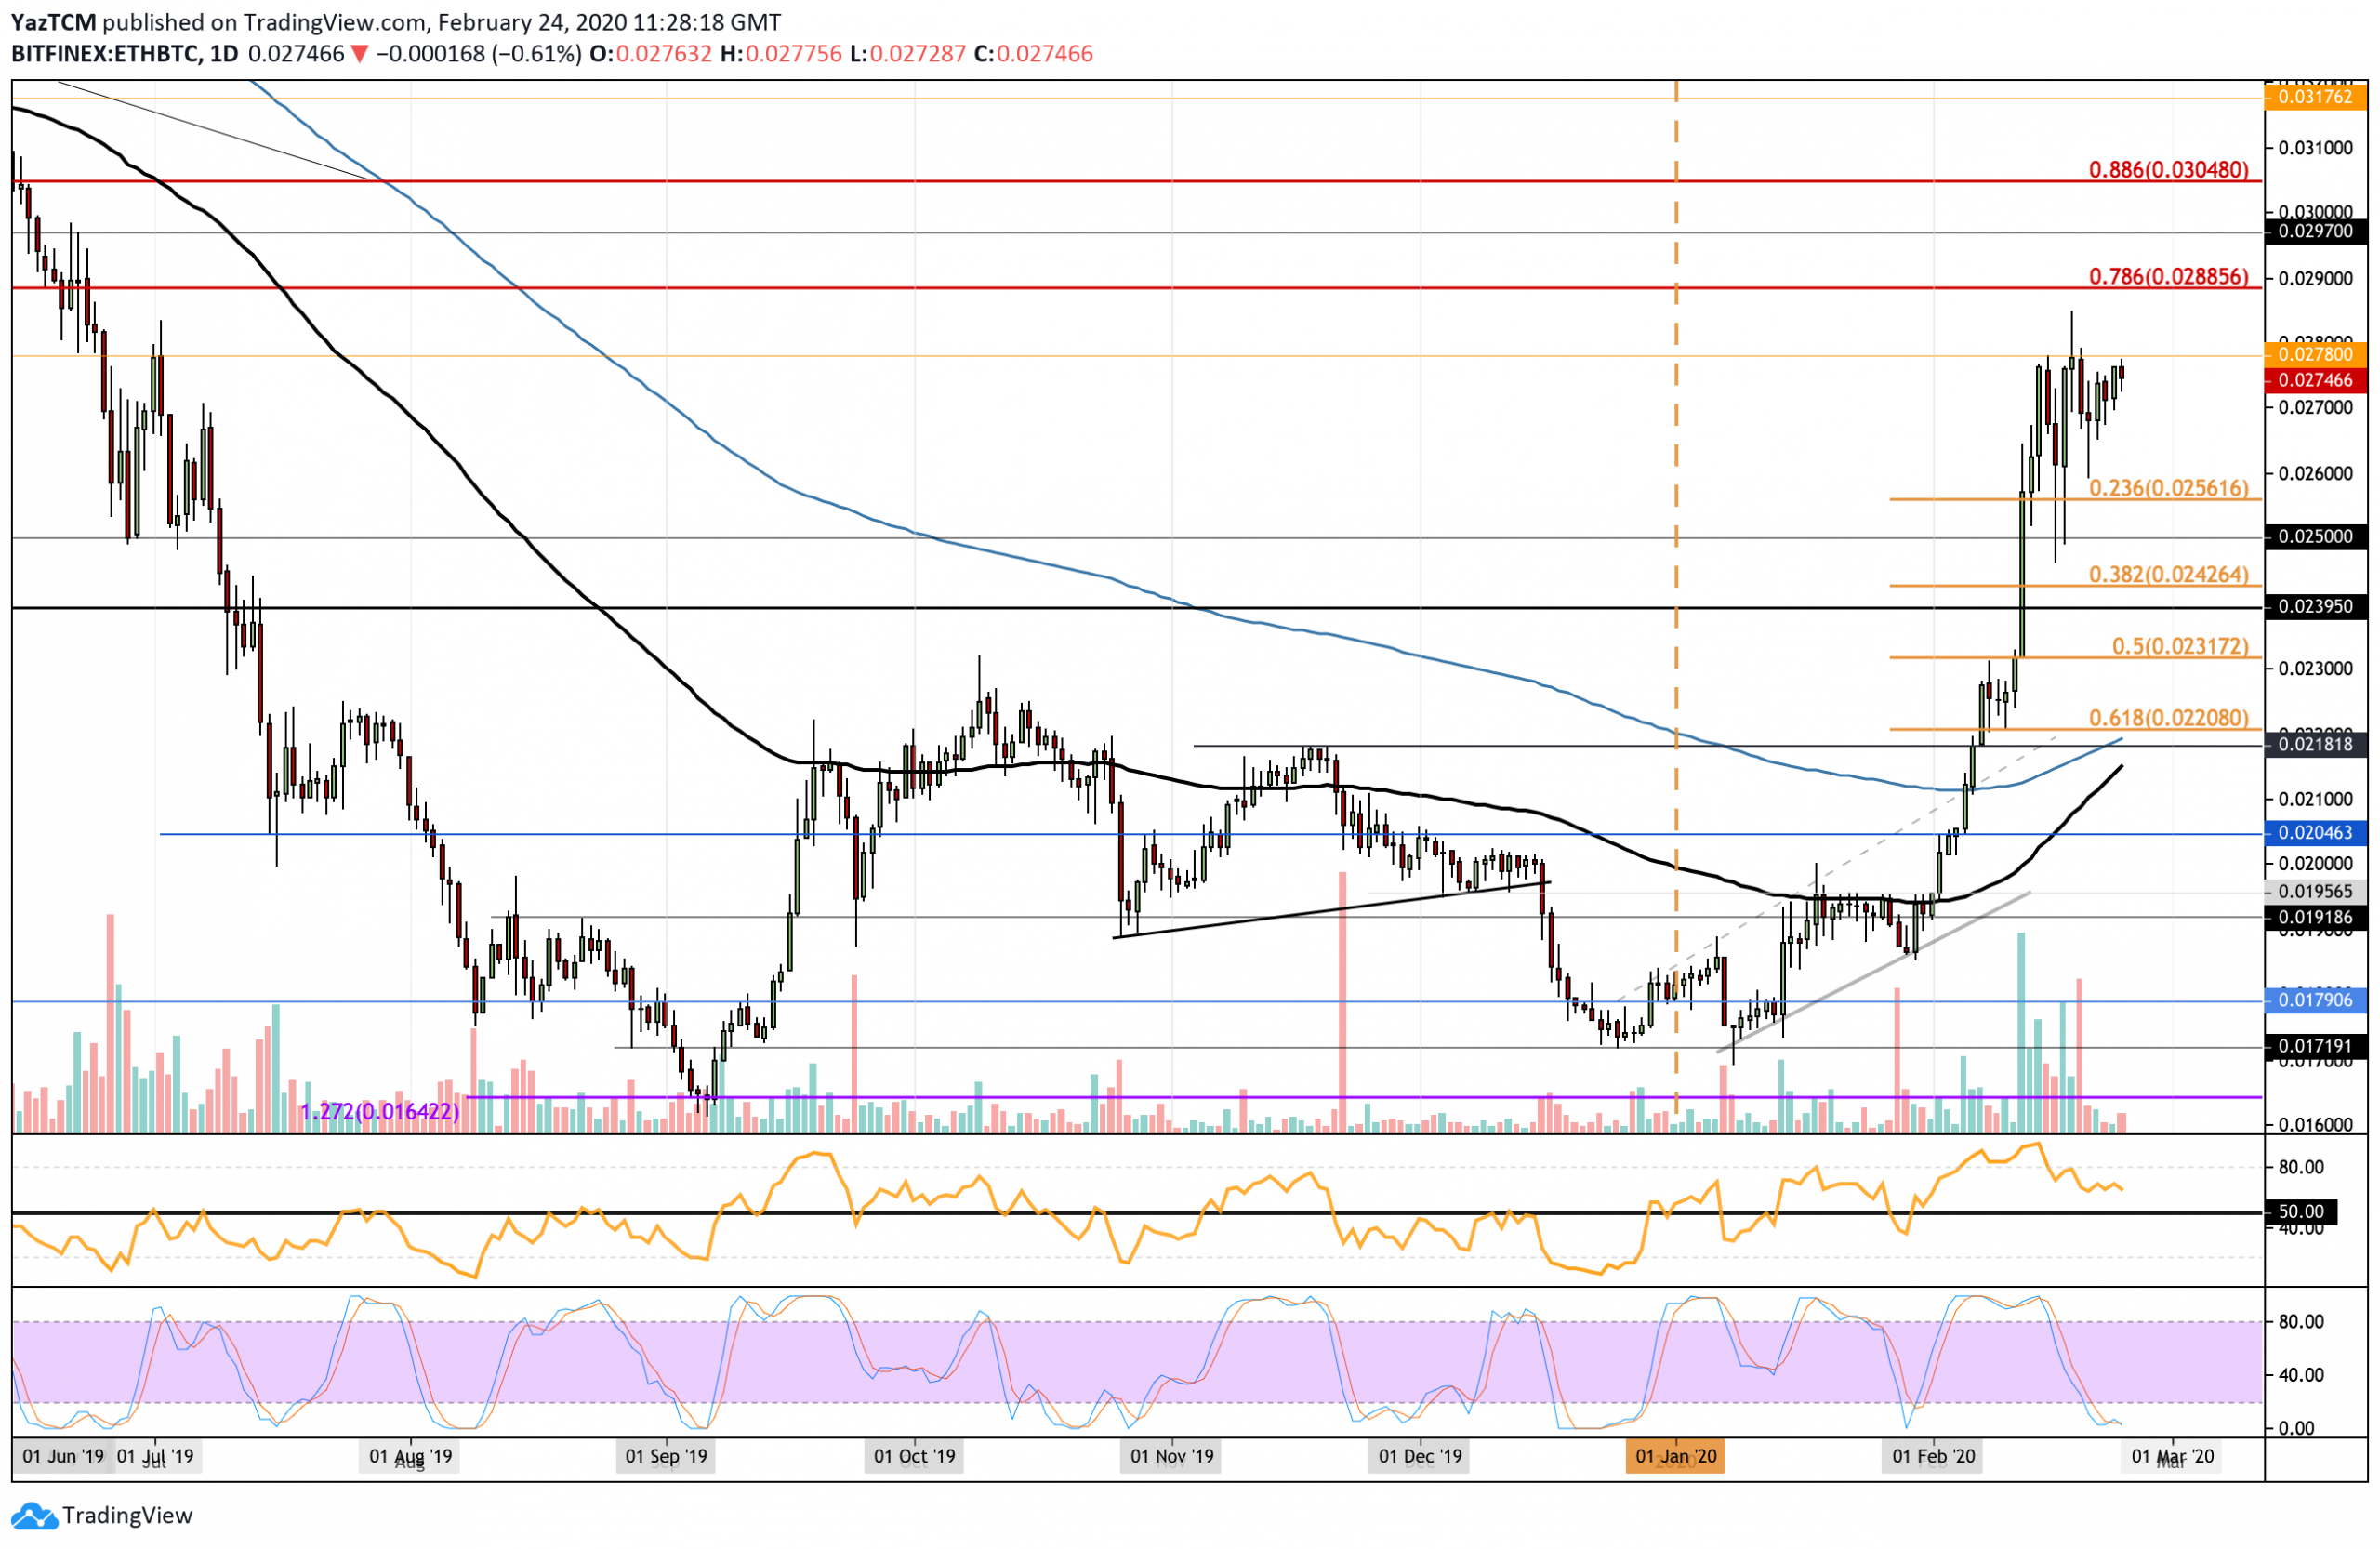 Ethereum Price Analysis: ETH At Crucial Resistance Against Bitcoin, May Start To Consolidate